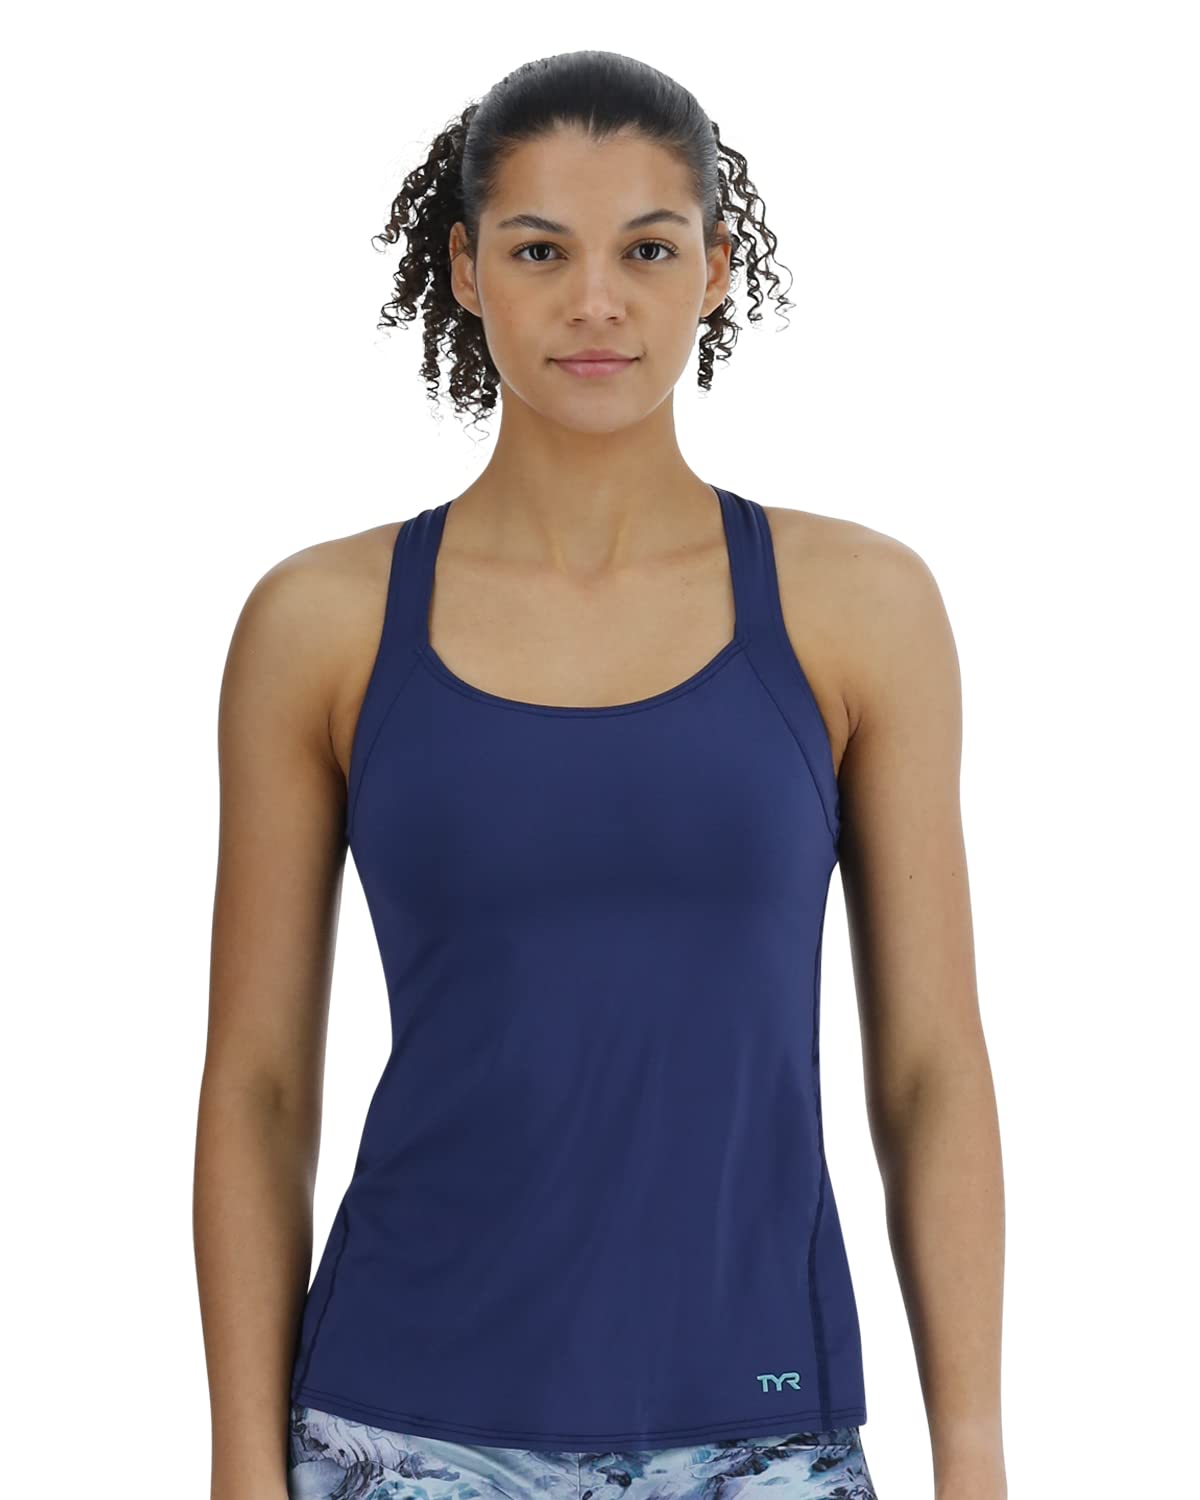 TYR Womens Standard Solid Lola Top for Swimming Yoga Fitness and Workout Patriot Blue X-Large